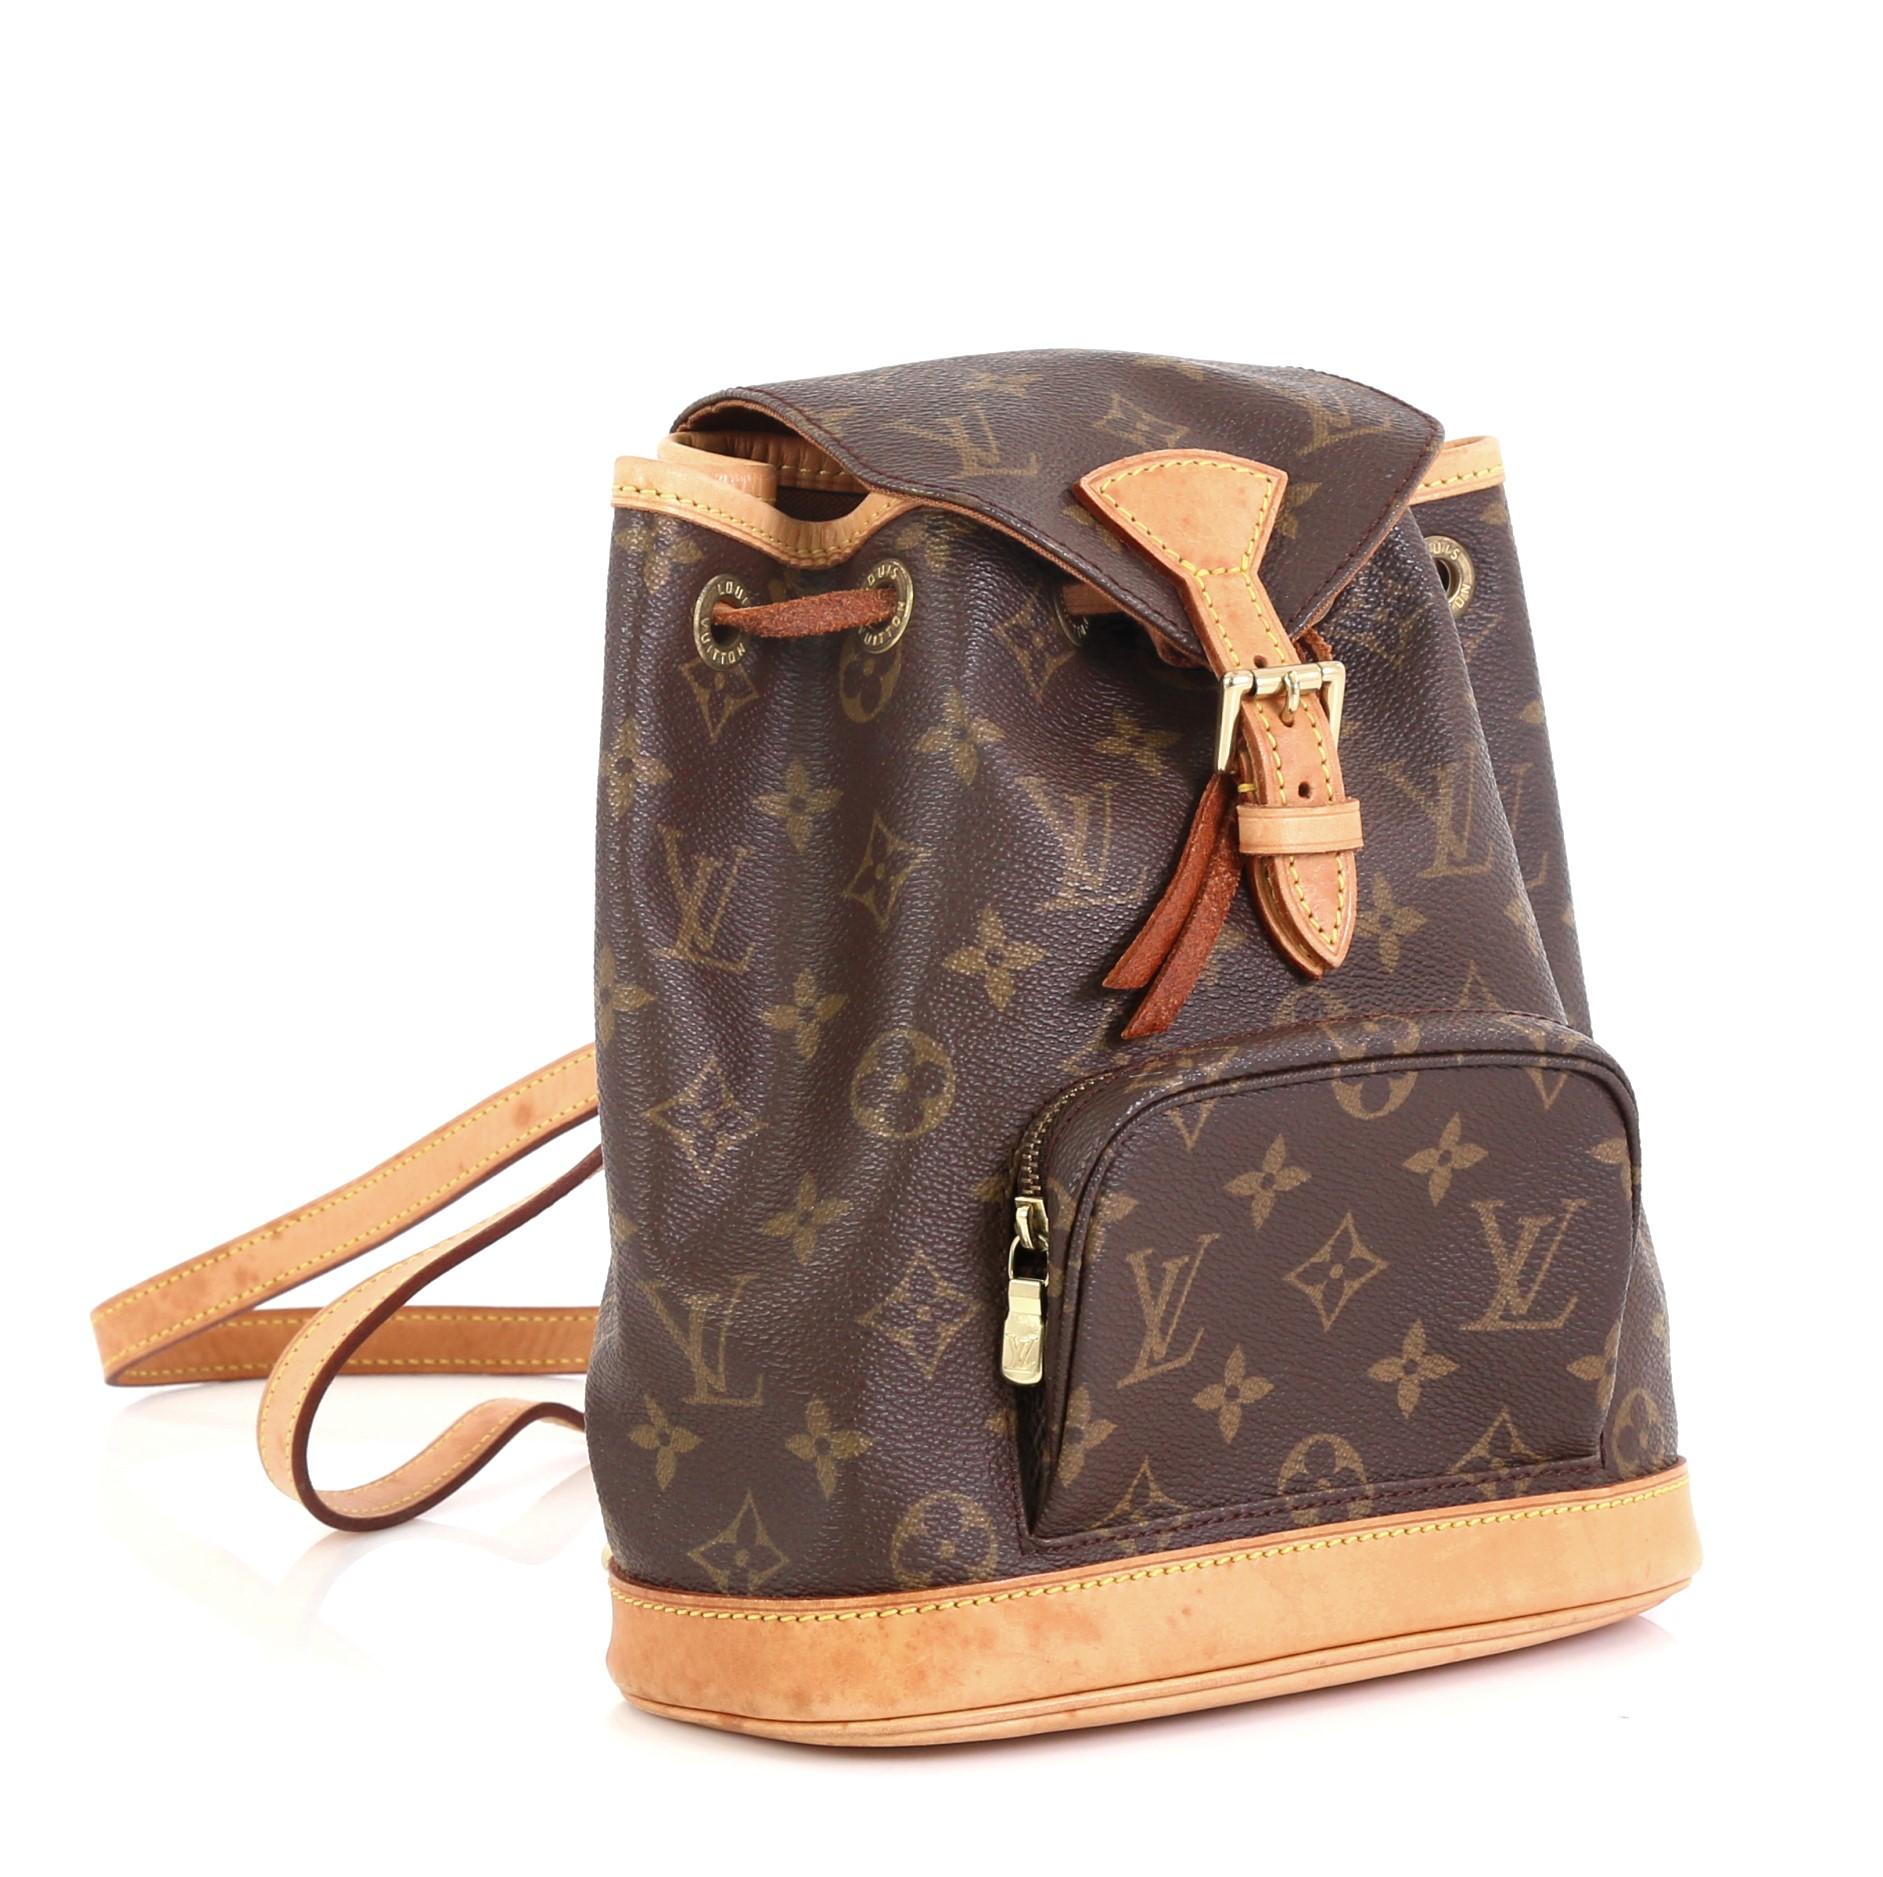 This Louis Vuitton Montsouris Backpack Monogram Canvas PM, crafted from brown monogram coated canvas, features adjustable shoulder straps, exterior front zip pocket, top flap with buckle, and gold-tone hardware. Its drawstring closure opens to a